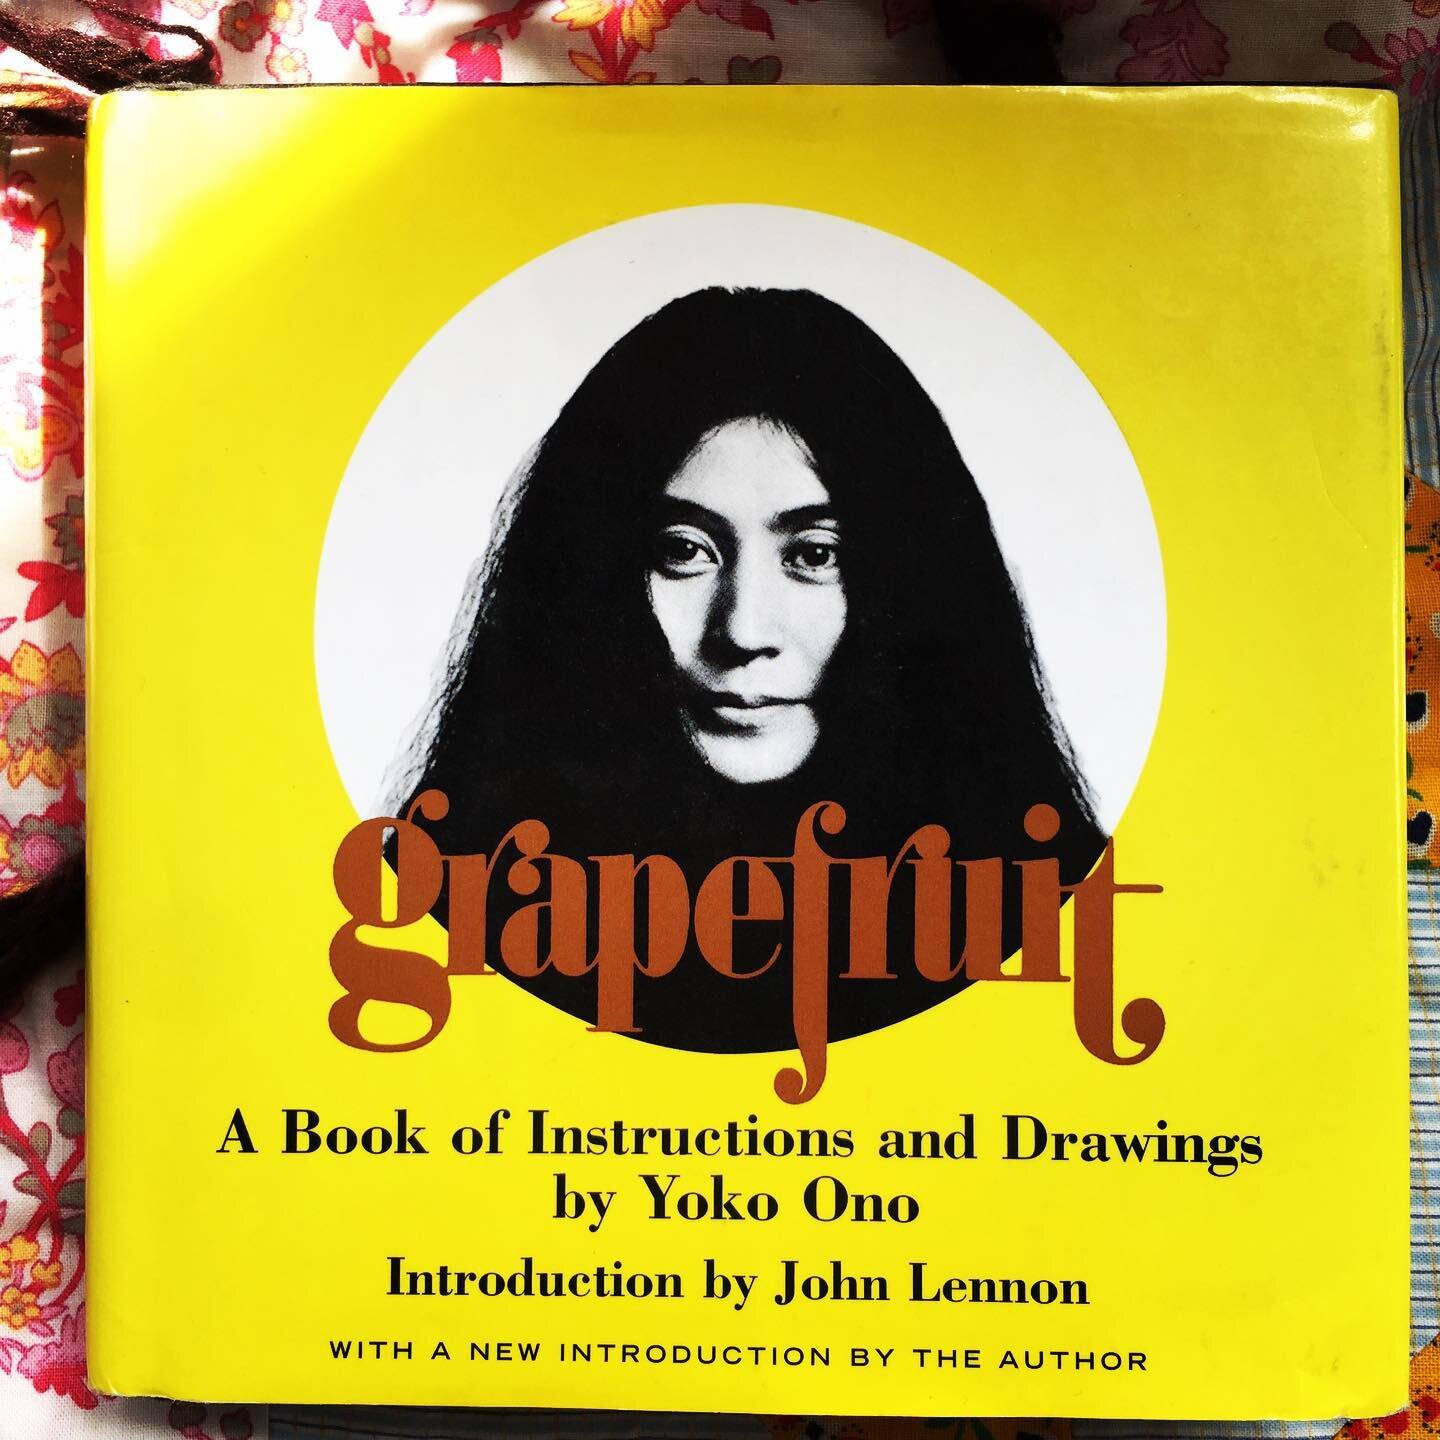 Grapefruit is one of my favorite books. Instructions as art. Needless to say, Yoko Ono has long been a major influence for me as an artist.
Then one day, I walked into a cluttered bookstore in San Francisco and found crammed onto a random shelf... Ac